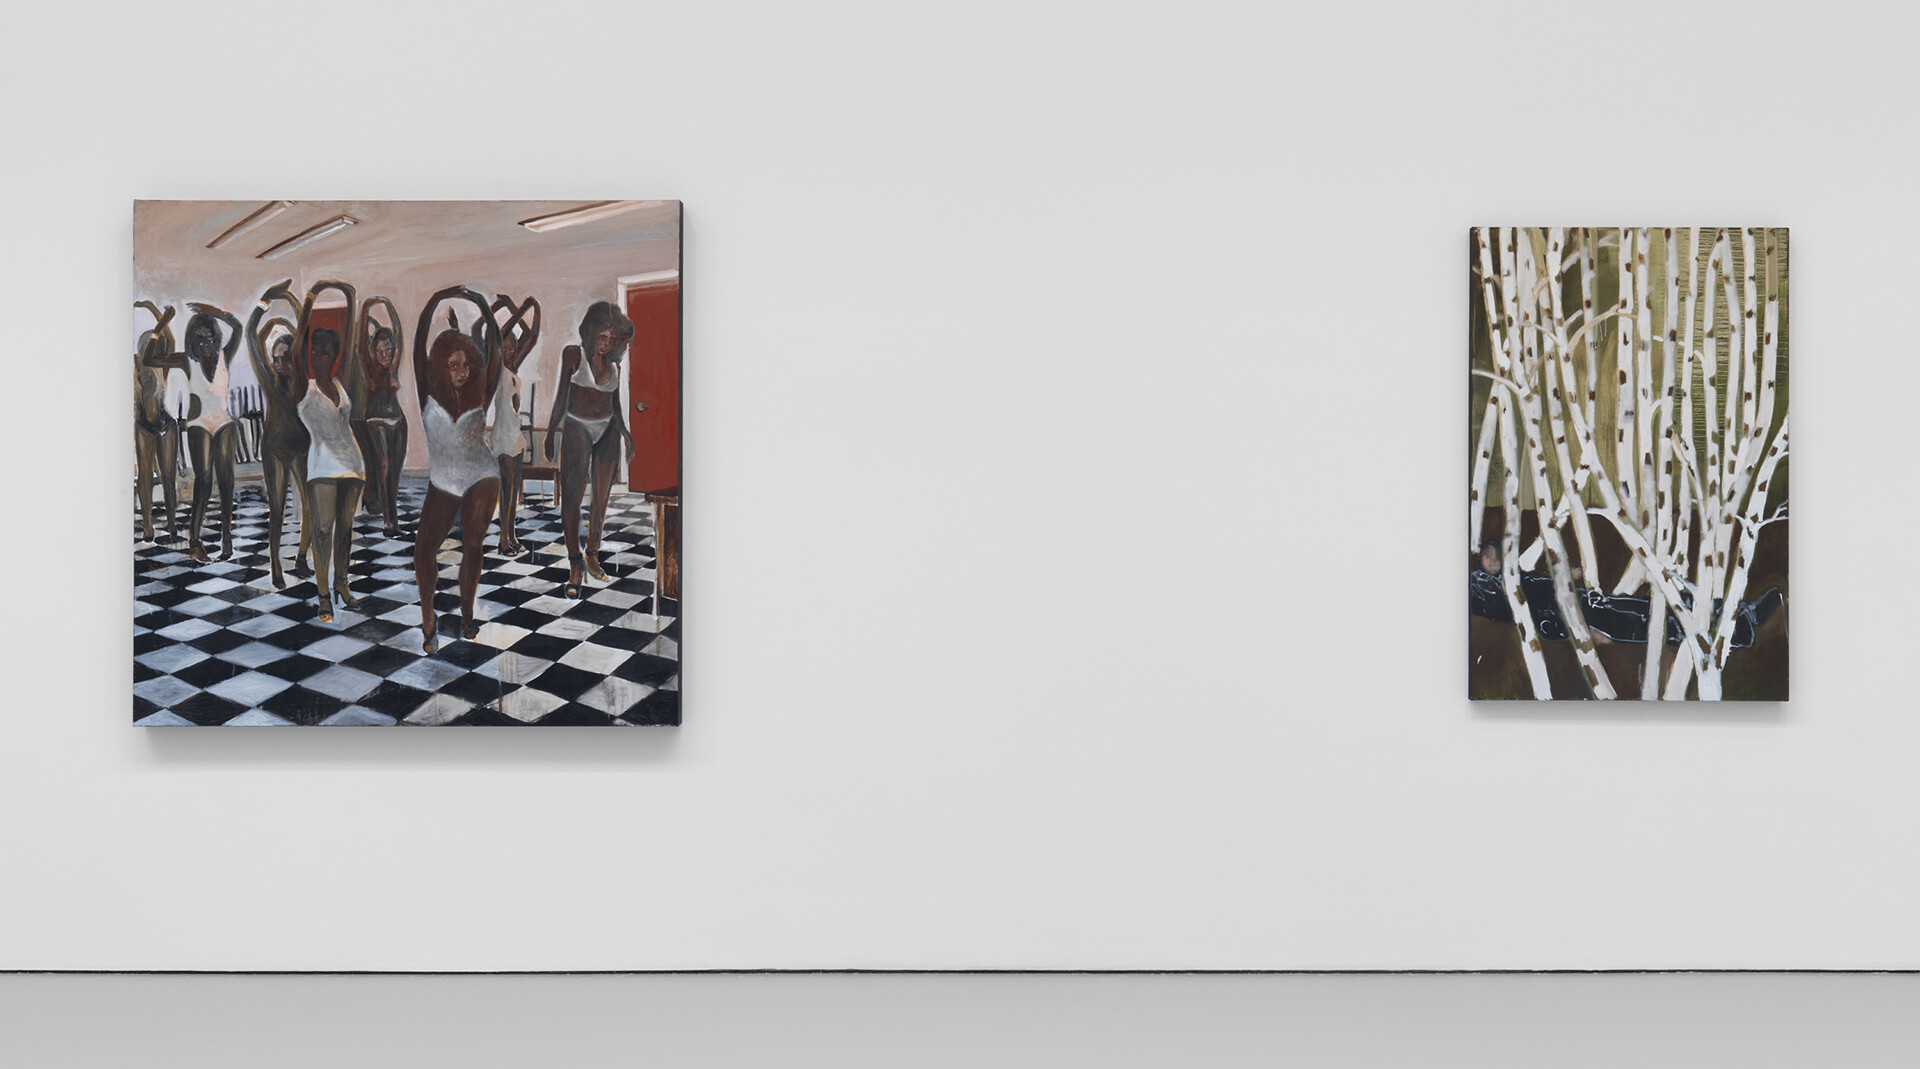 An installation view of the show Noah Davis at David Zwirner, New York, in 2020.